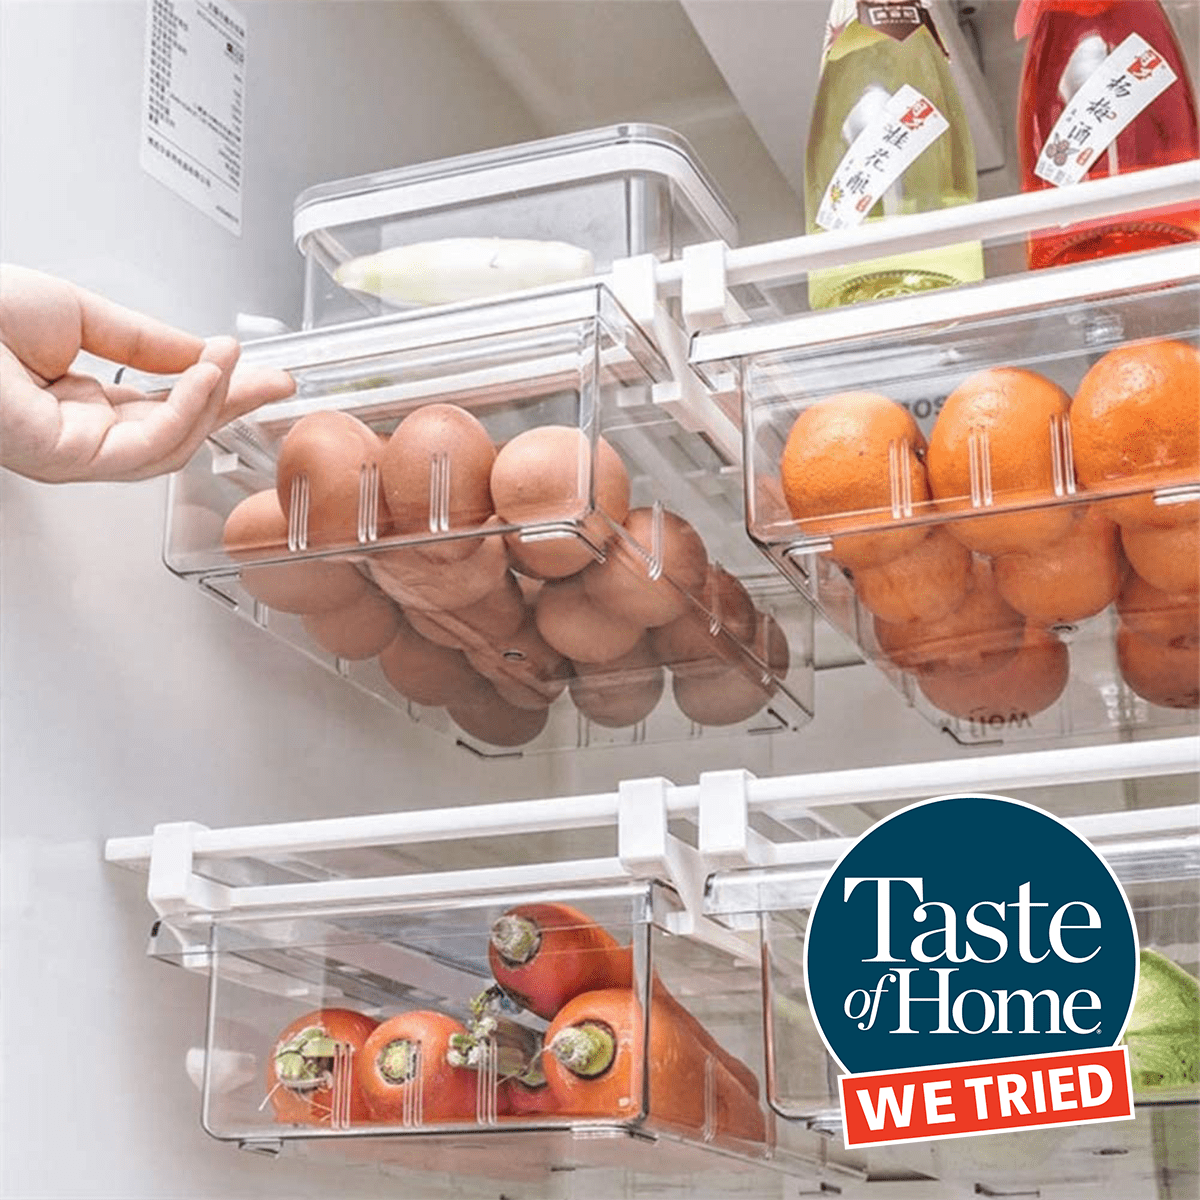 Utopia Home Egg Container With Lid & Handle for Refrigerator, Pack of 2 -  Clear Egg Holder for Kitchen Storage